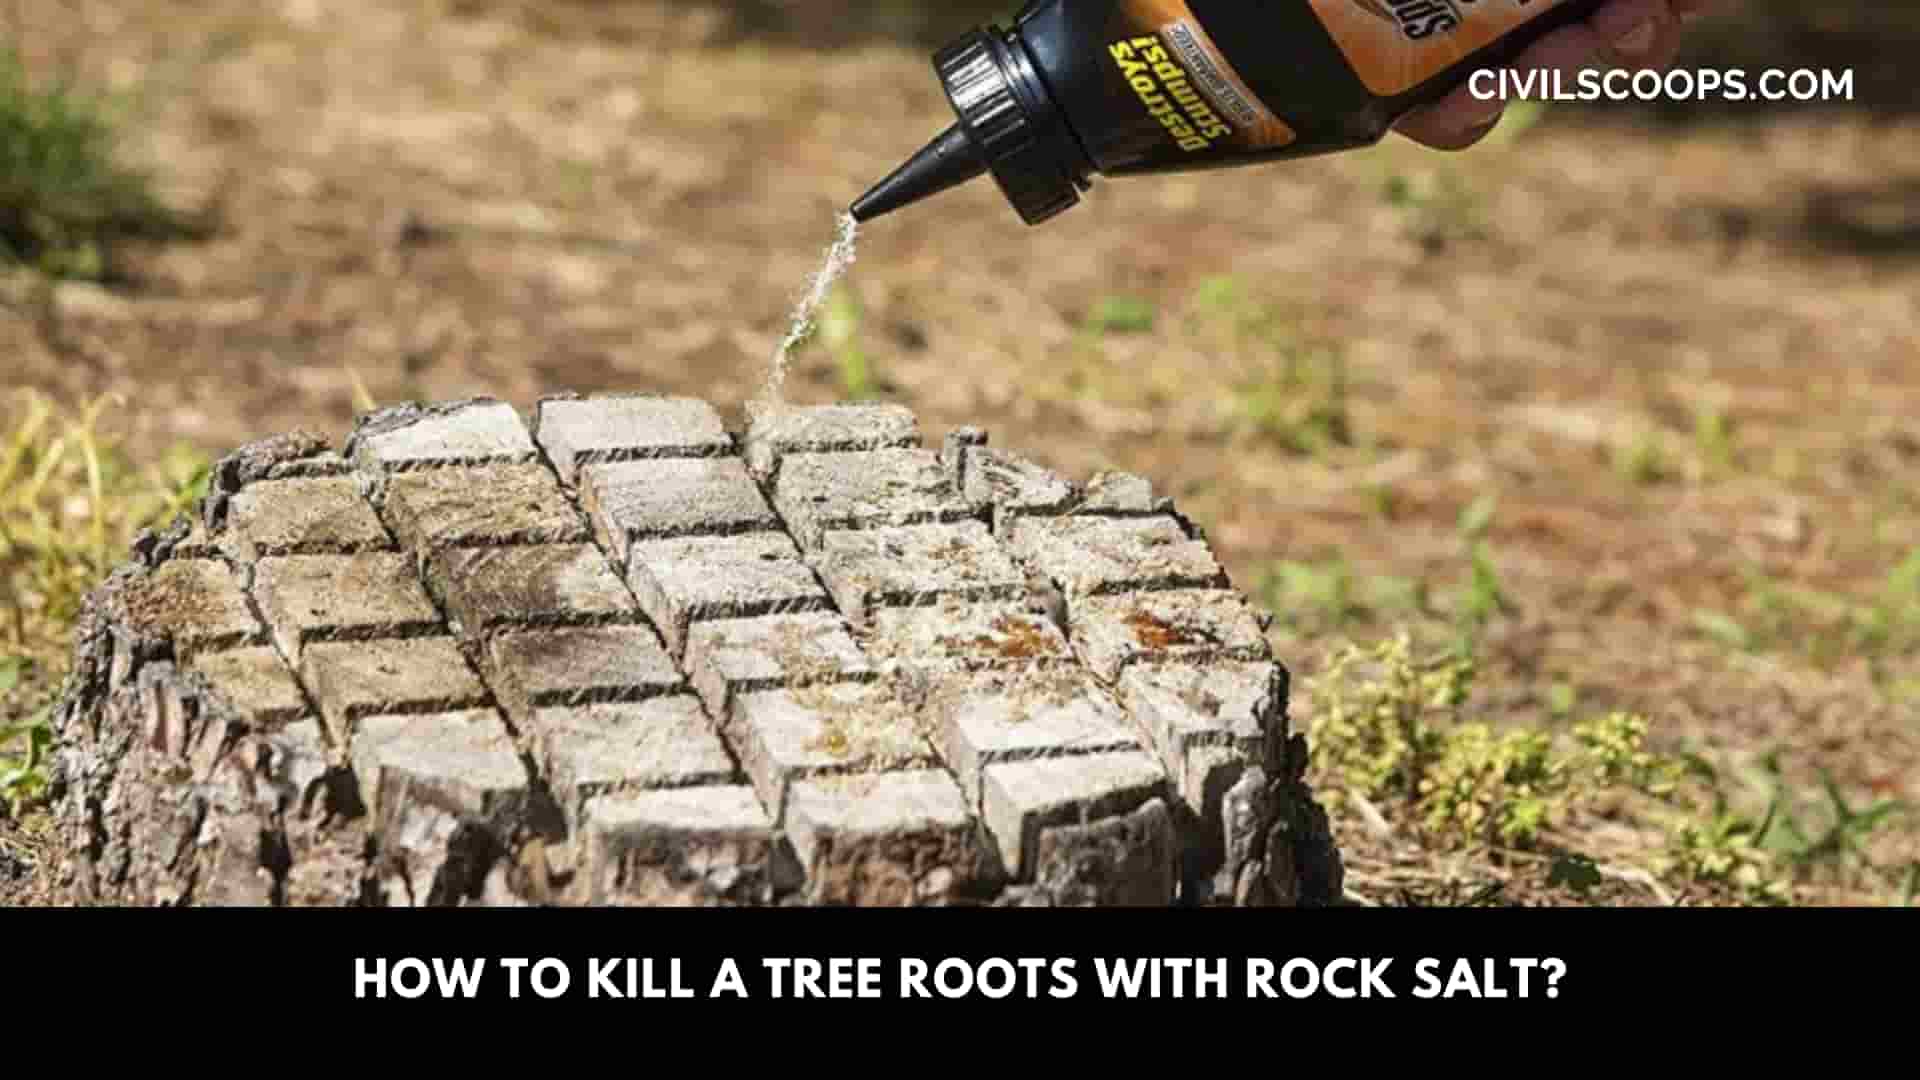 How to Kill a Tree Roots with Rock Salt?